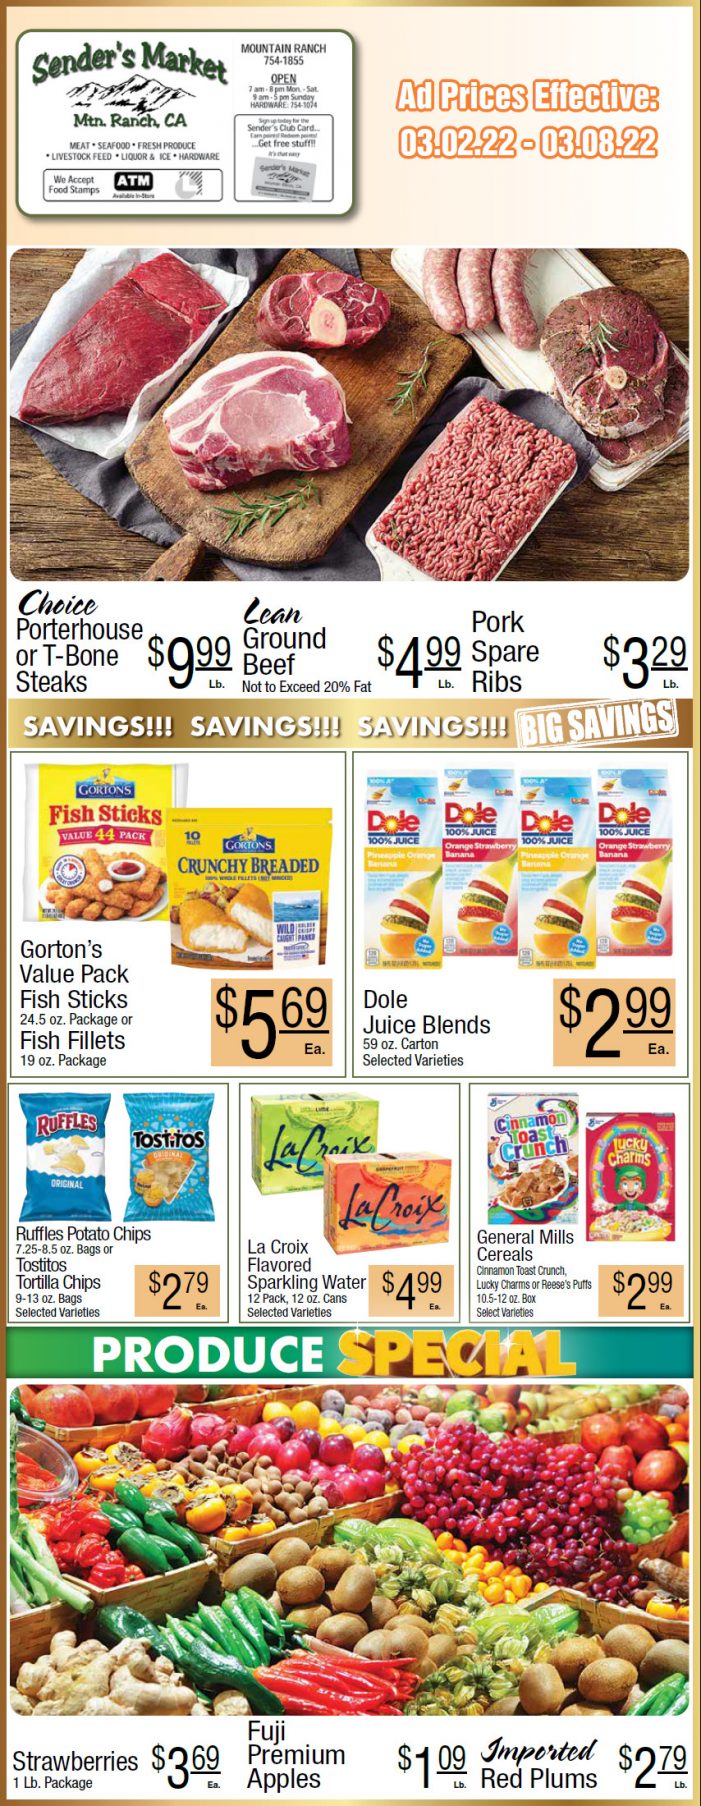 Sender’s Market’s Weekly Ad & Grocery Specials March 2nd ~ March 8th! Shop Local & Save!